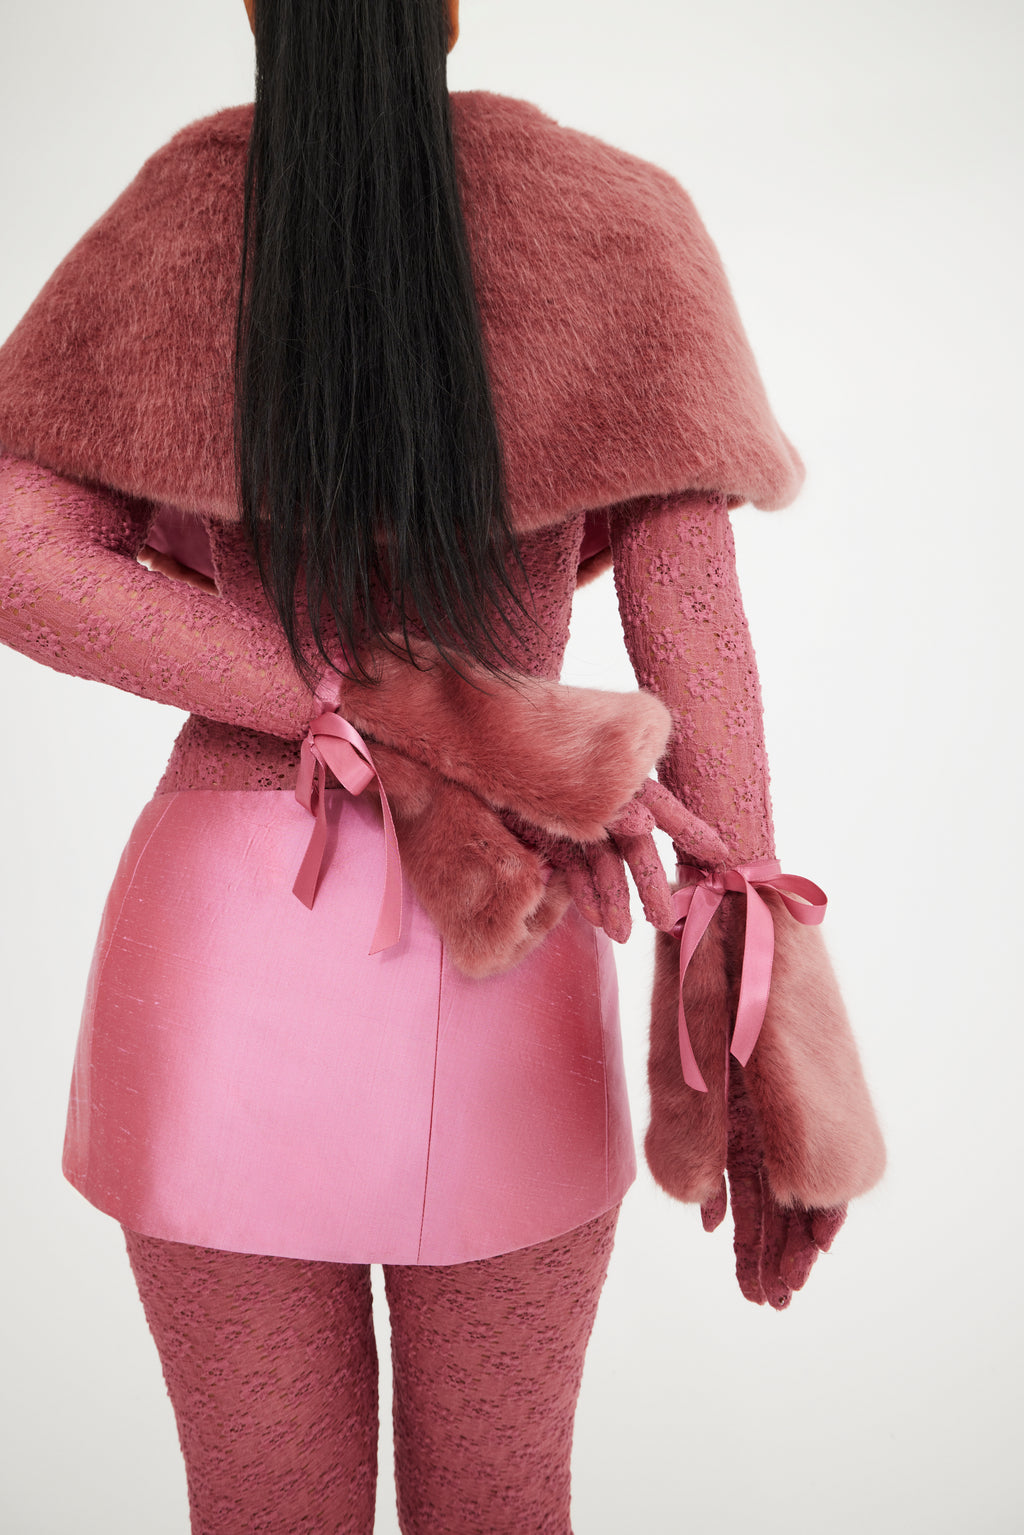 Everyone is rushing to get their hands on this Zara Faux Fur